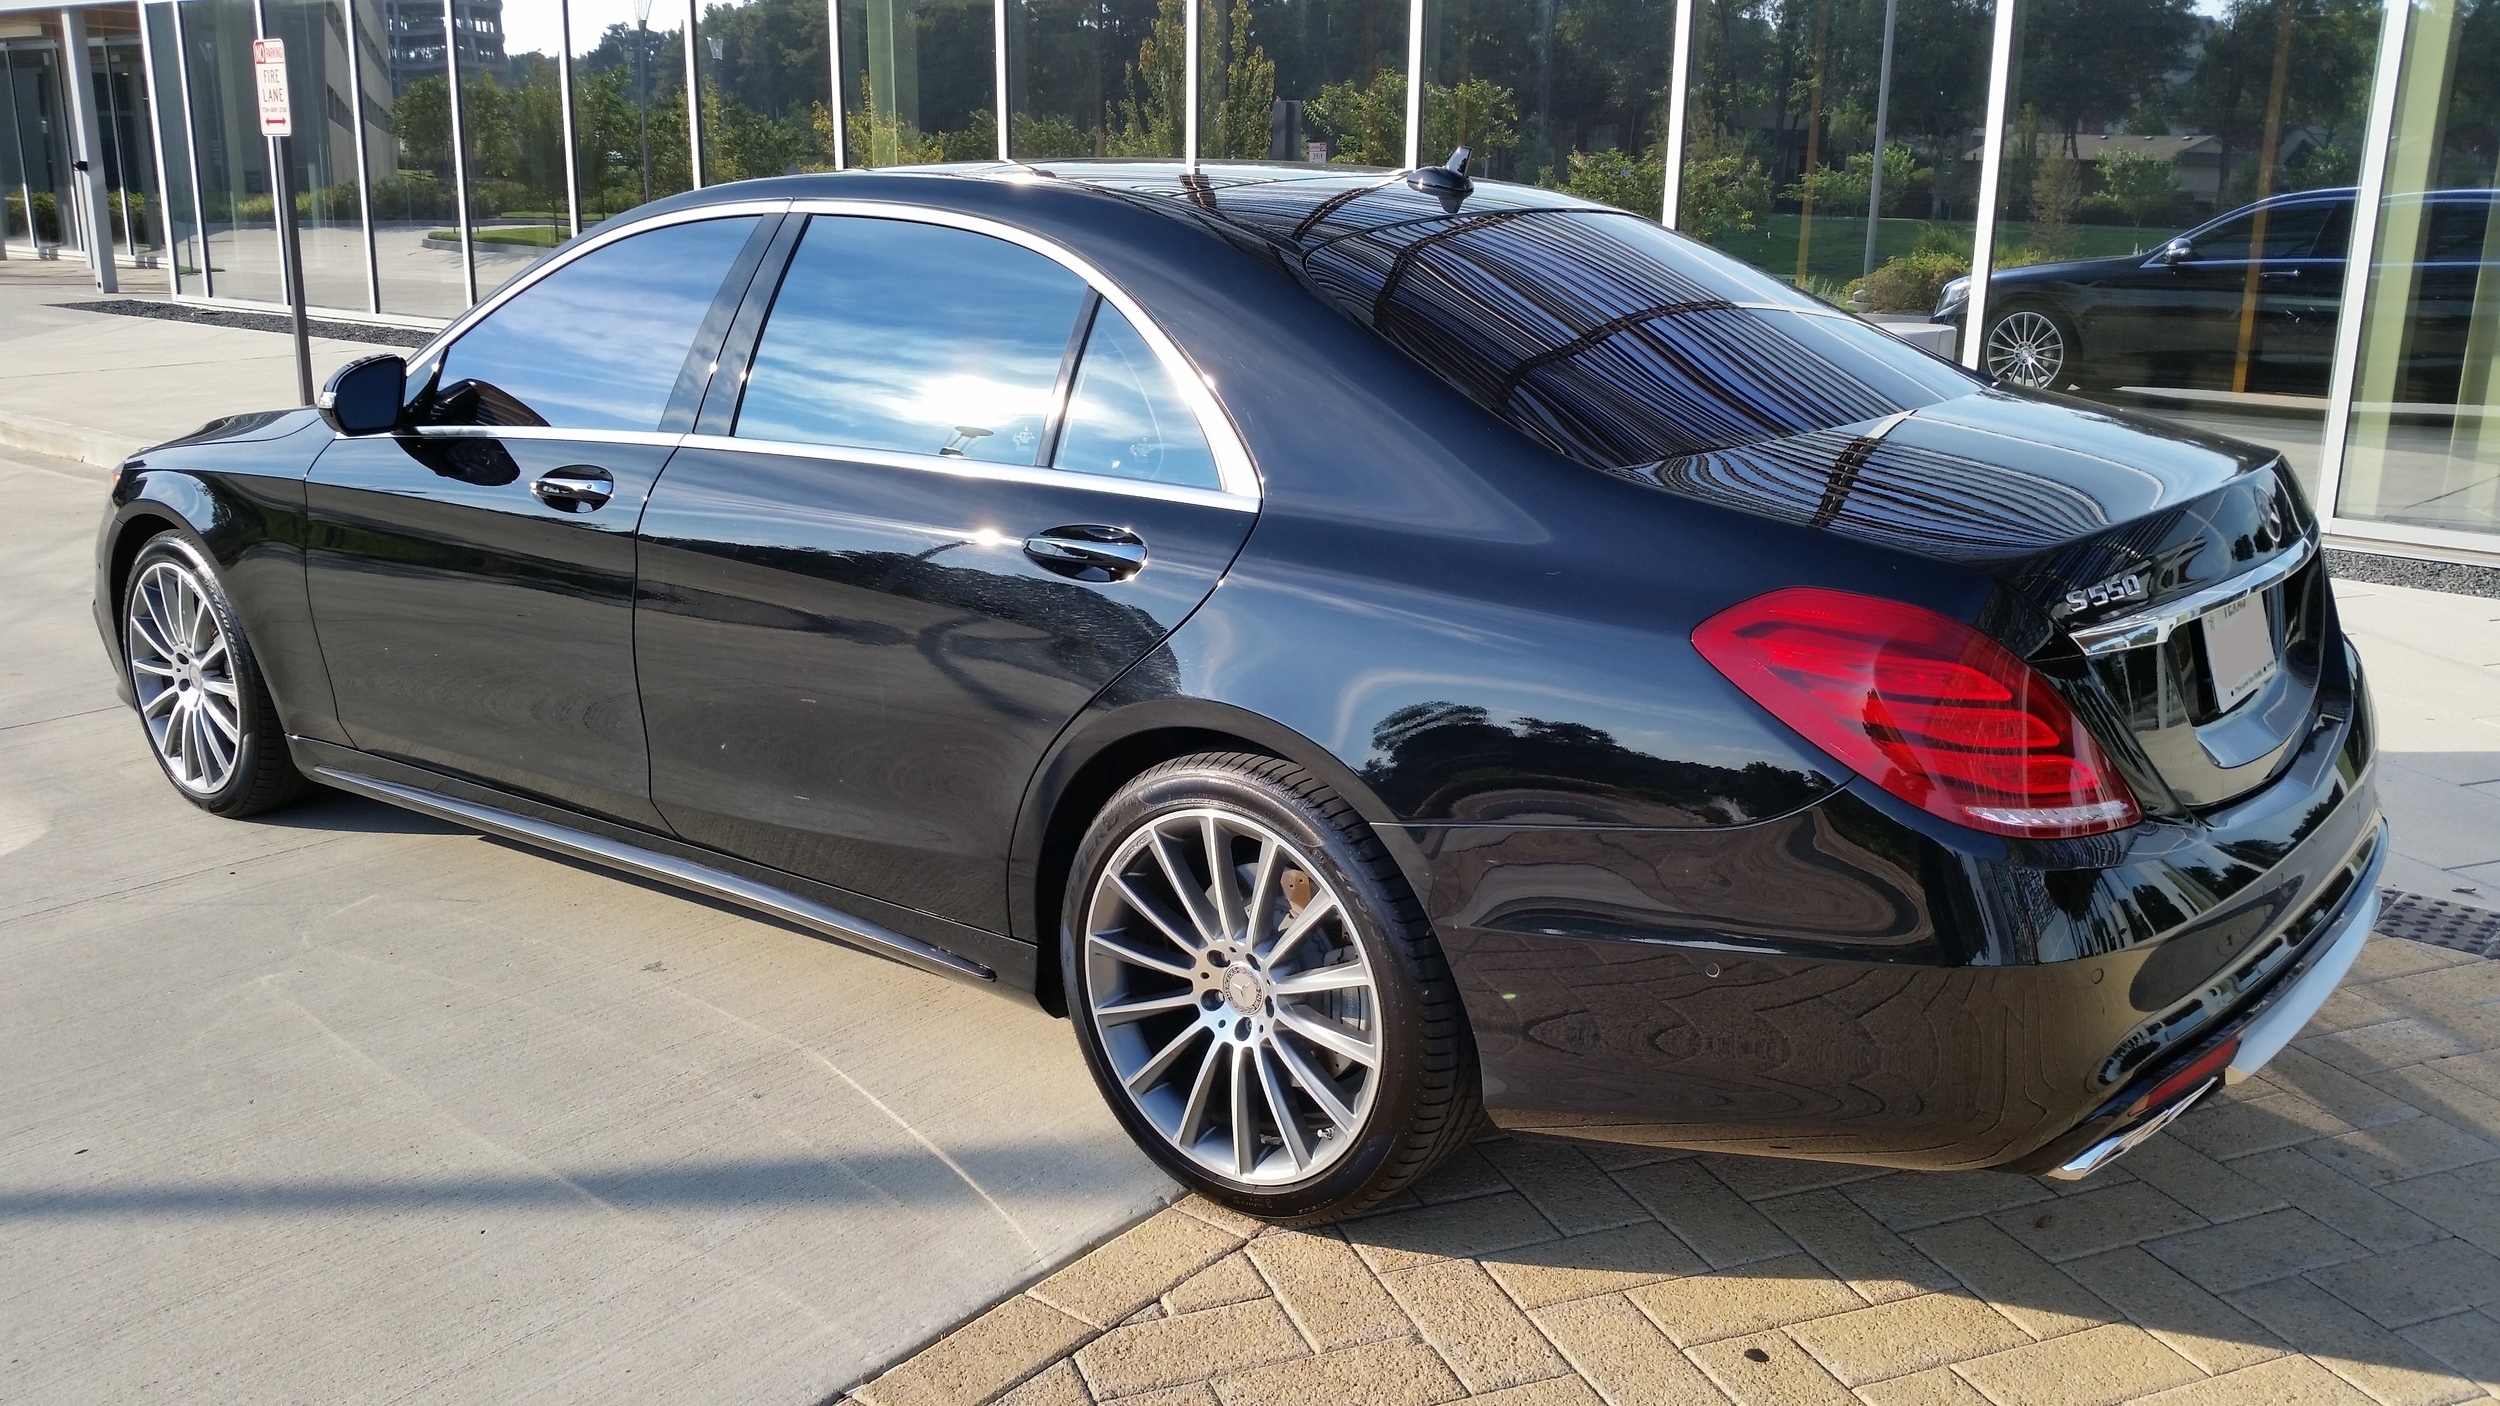 2014 MercedesBenz Sclass  S550 First Drive 8211 Review 8211 Car  and Driver